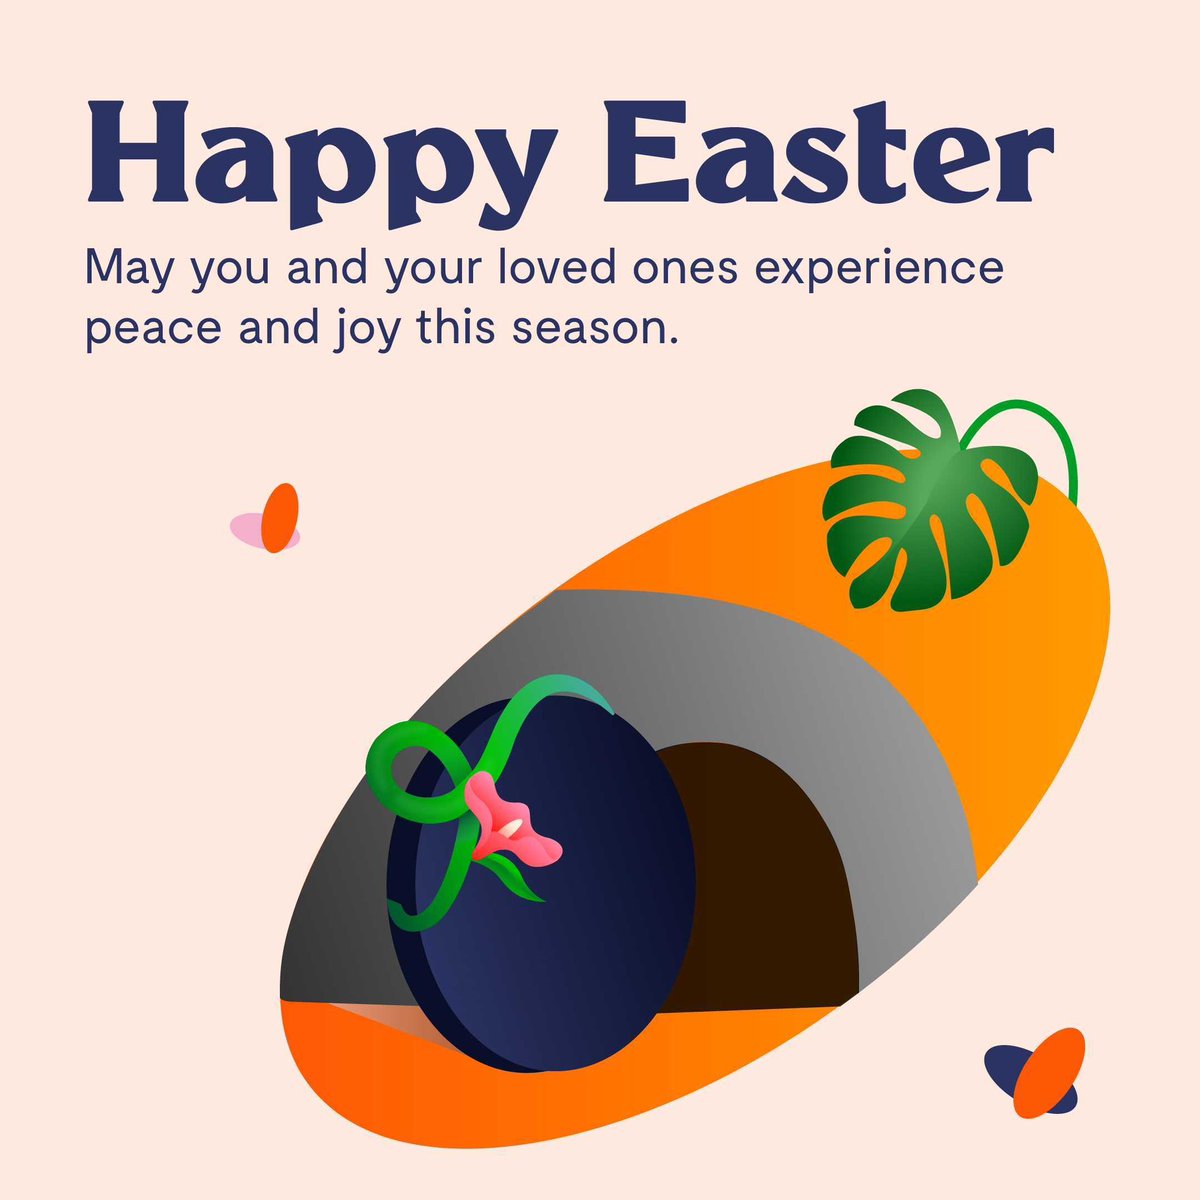 We wish you a Happy Easter celebration filled with joy and hope this season ❤️ With love, from all of us at Flutterwave 🦋